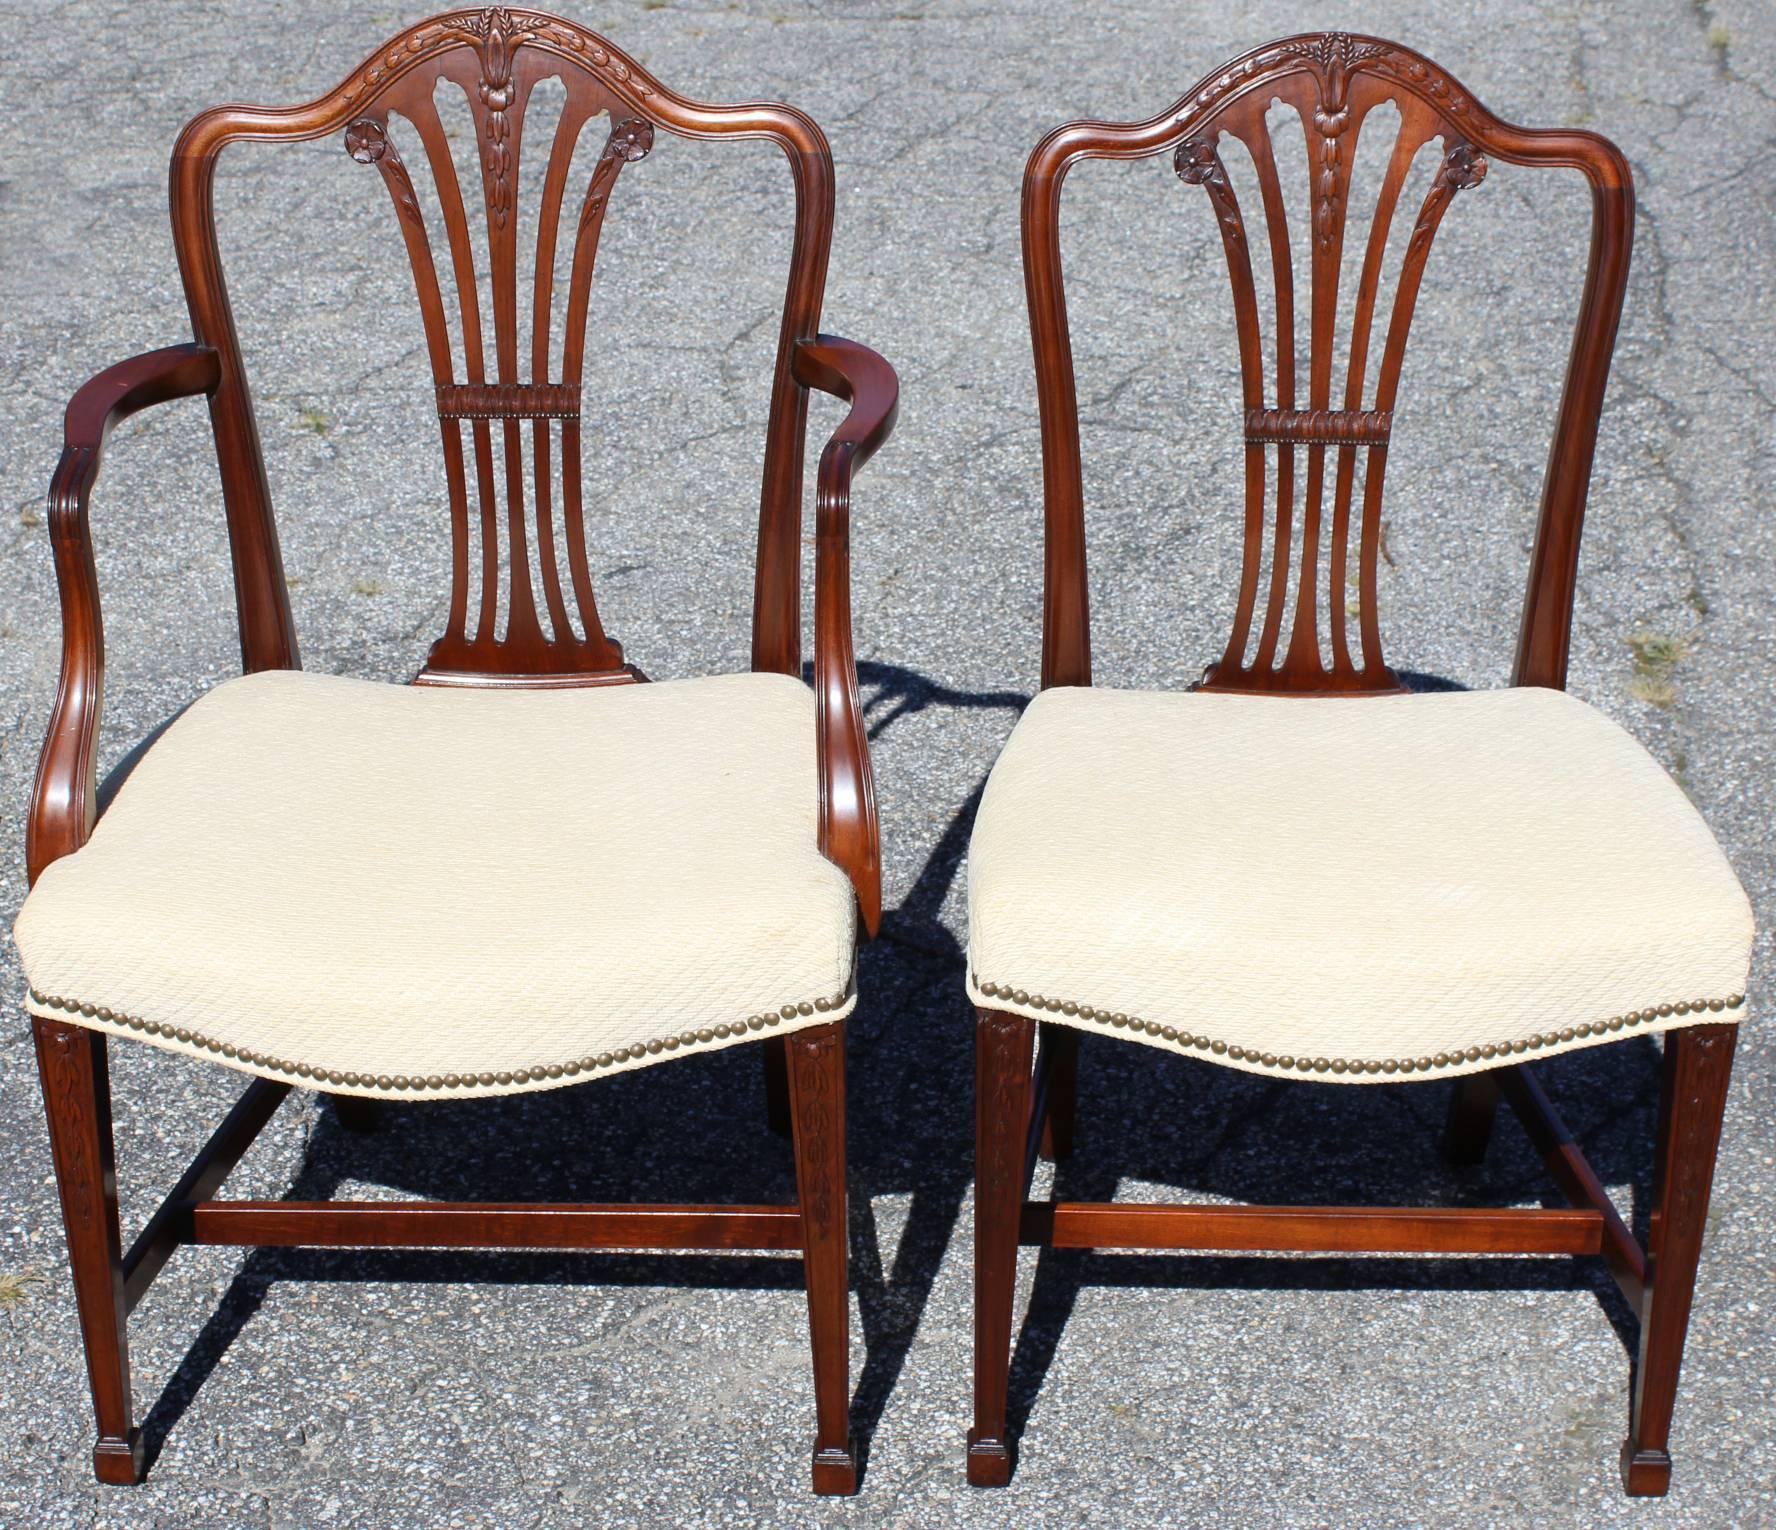 A fine solid set of eight mahogany dining chairs, two armchairs and six side chairs, with carved bellflower decoration on the splats and legs, and cream upholstered fabric seats. Each chair has an incised four digit number, and one armchair has a